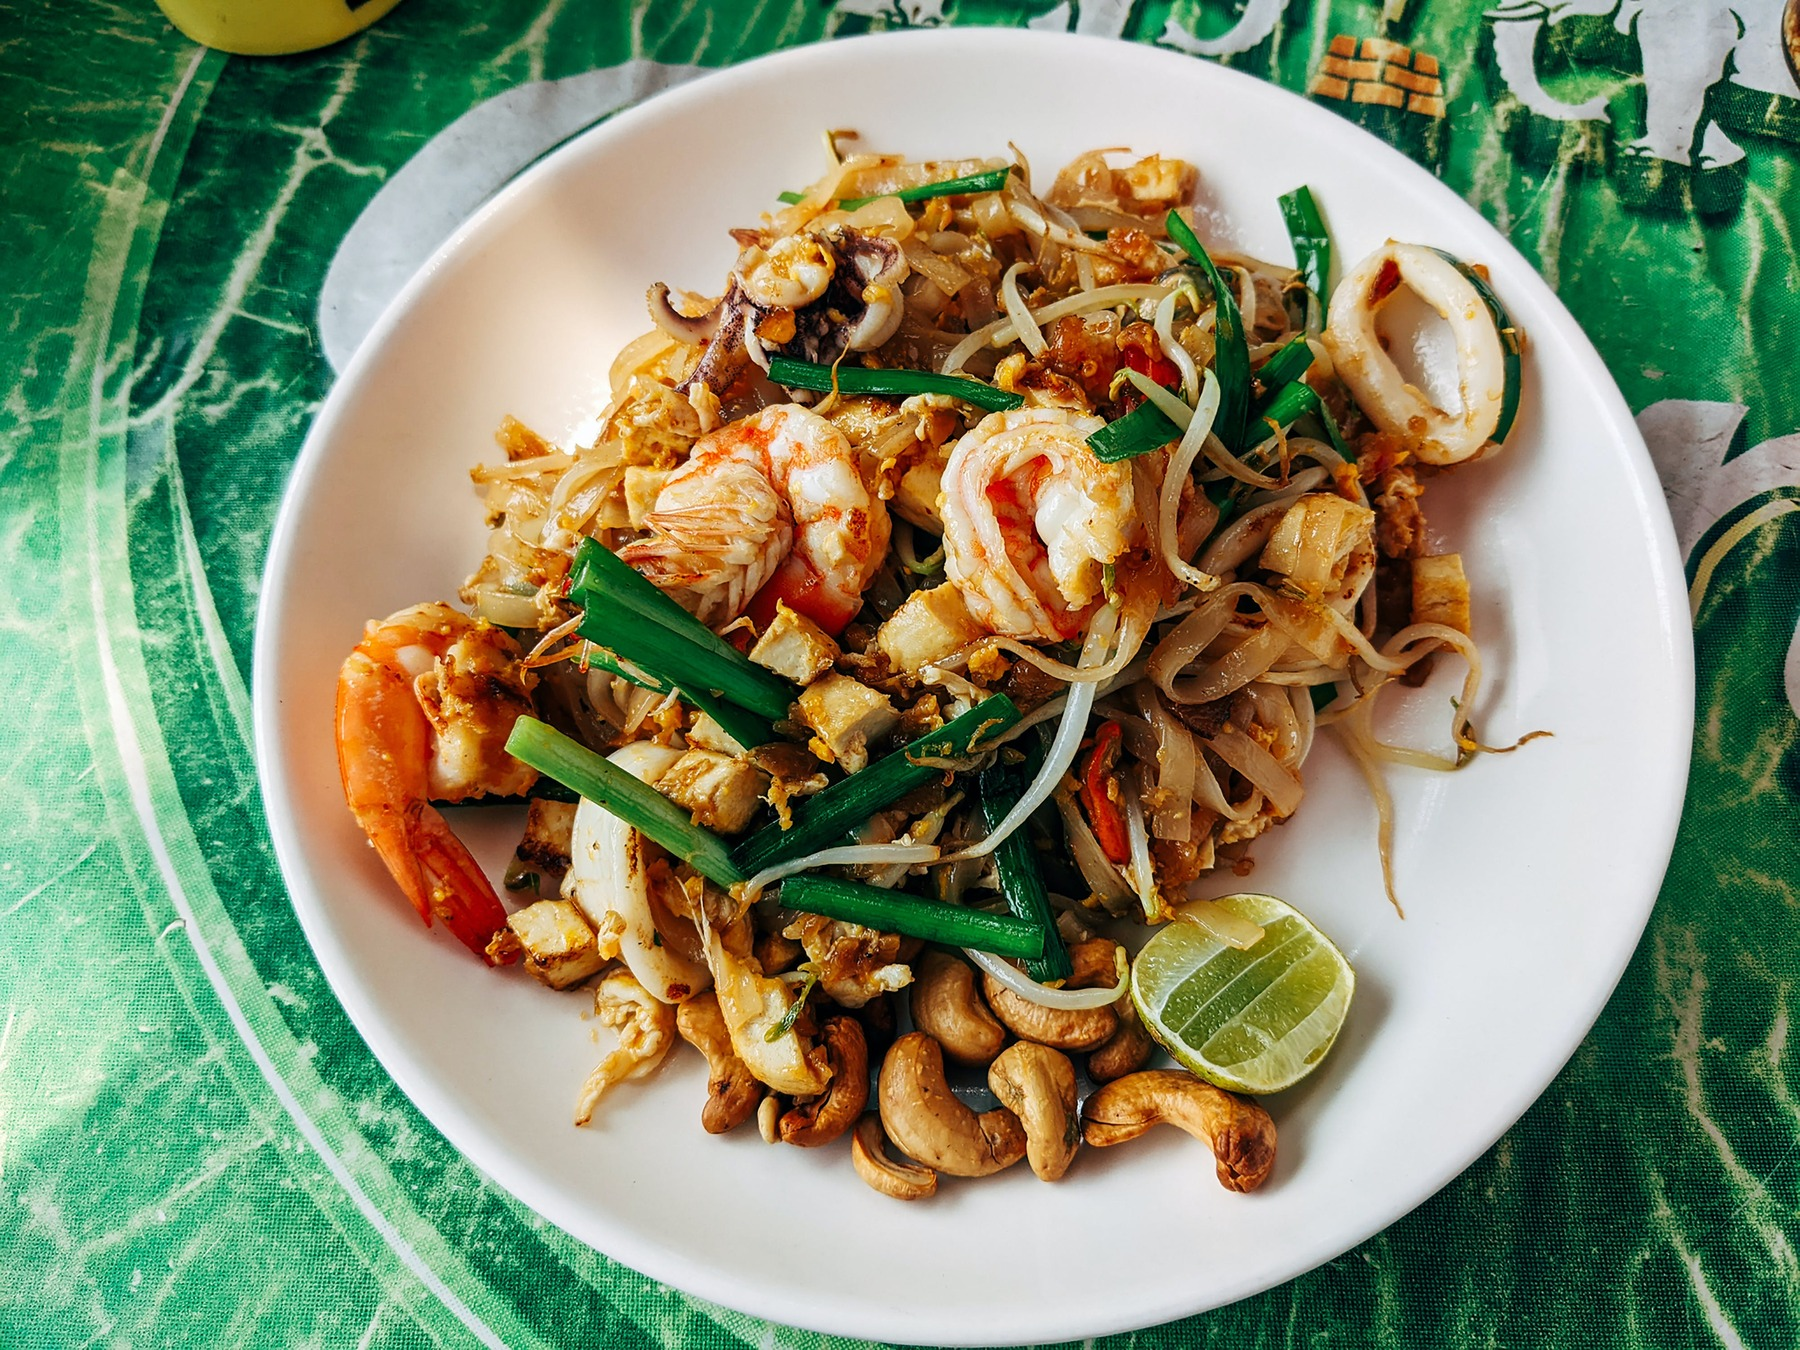 Pad Thai, a flavorful Thai dish - Authentic taste in every bite